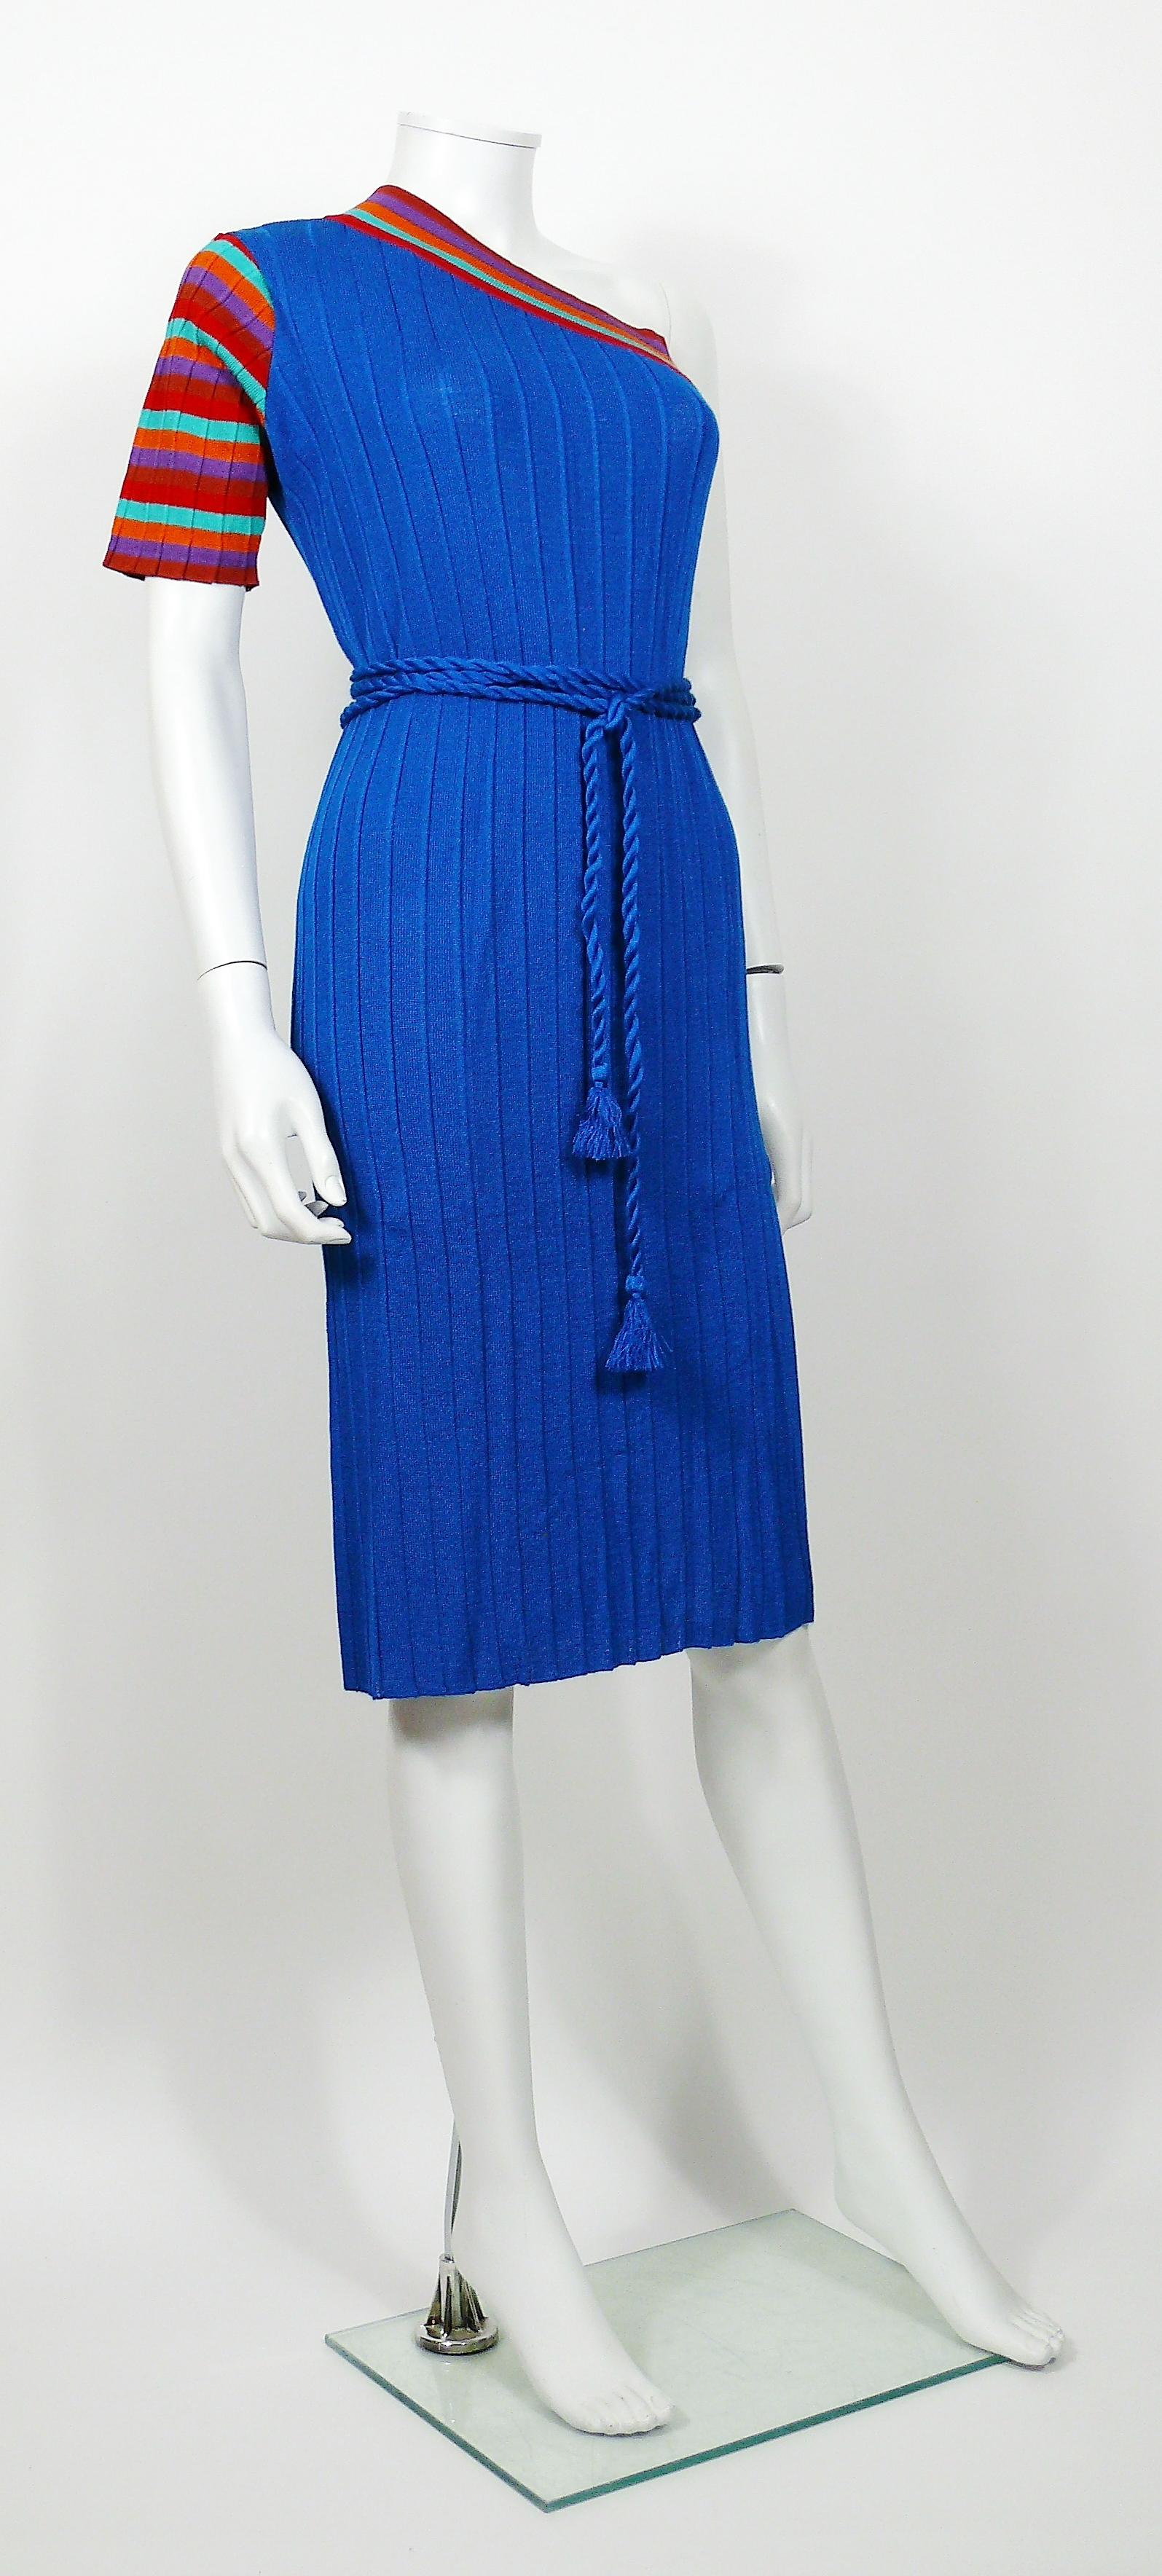 YVES SAINT LAURENT vintage tricot dress. 

This dress features :
- Knitted fabric in blue with colorful stripes on the neckline, sleeve and side slit.
- Straight cut.
- One shoulder.
- Side slit.
- Original matching tassel belt.

Label reads YVES